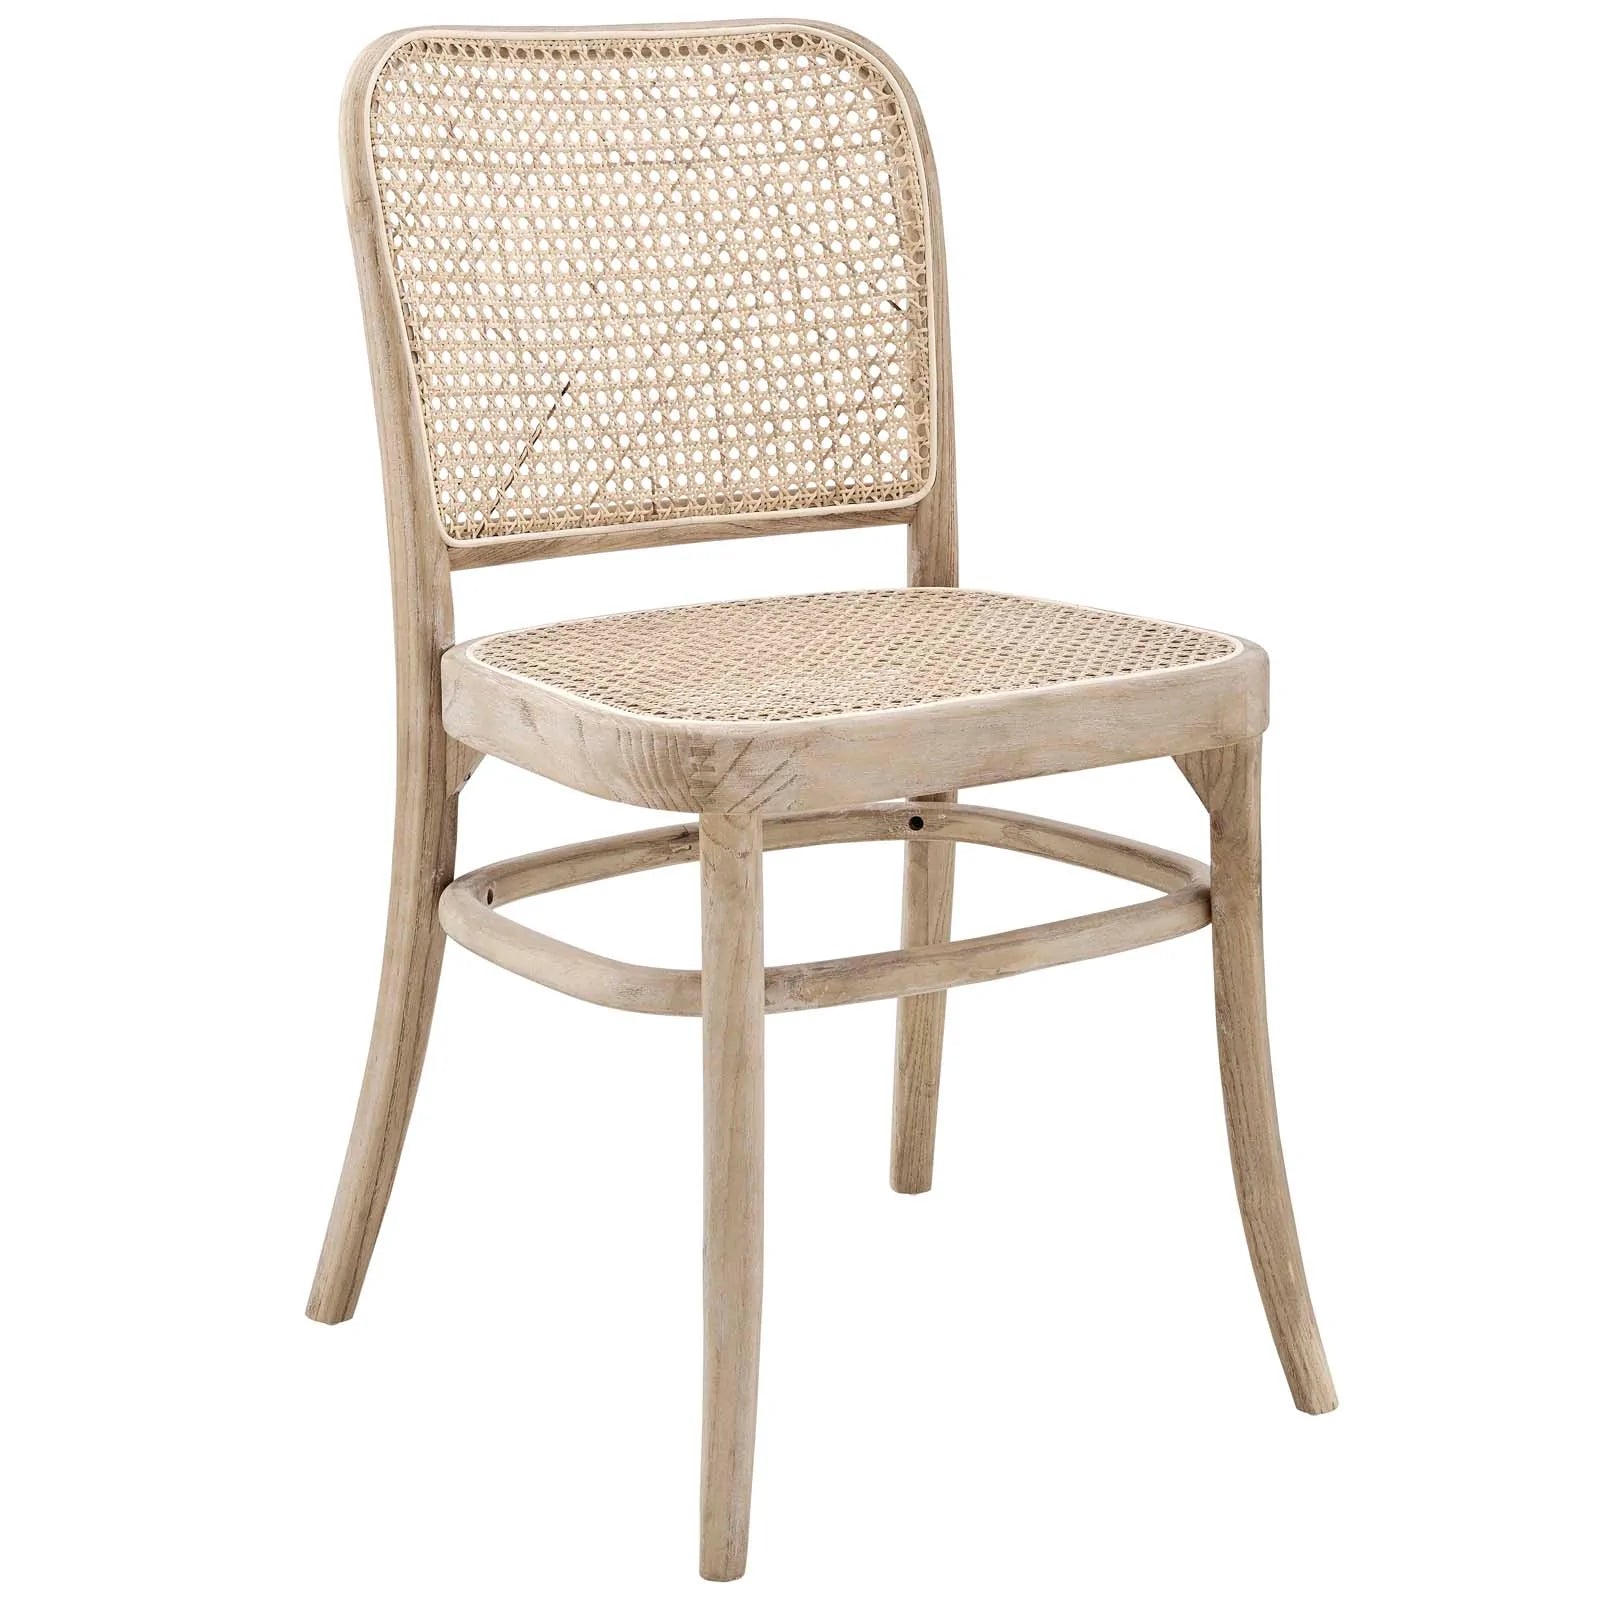 Winona Wood Dining Side Chair - Natural Gray